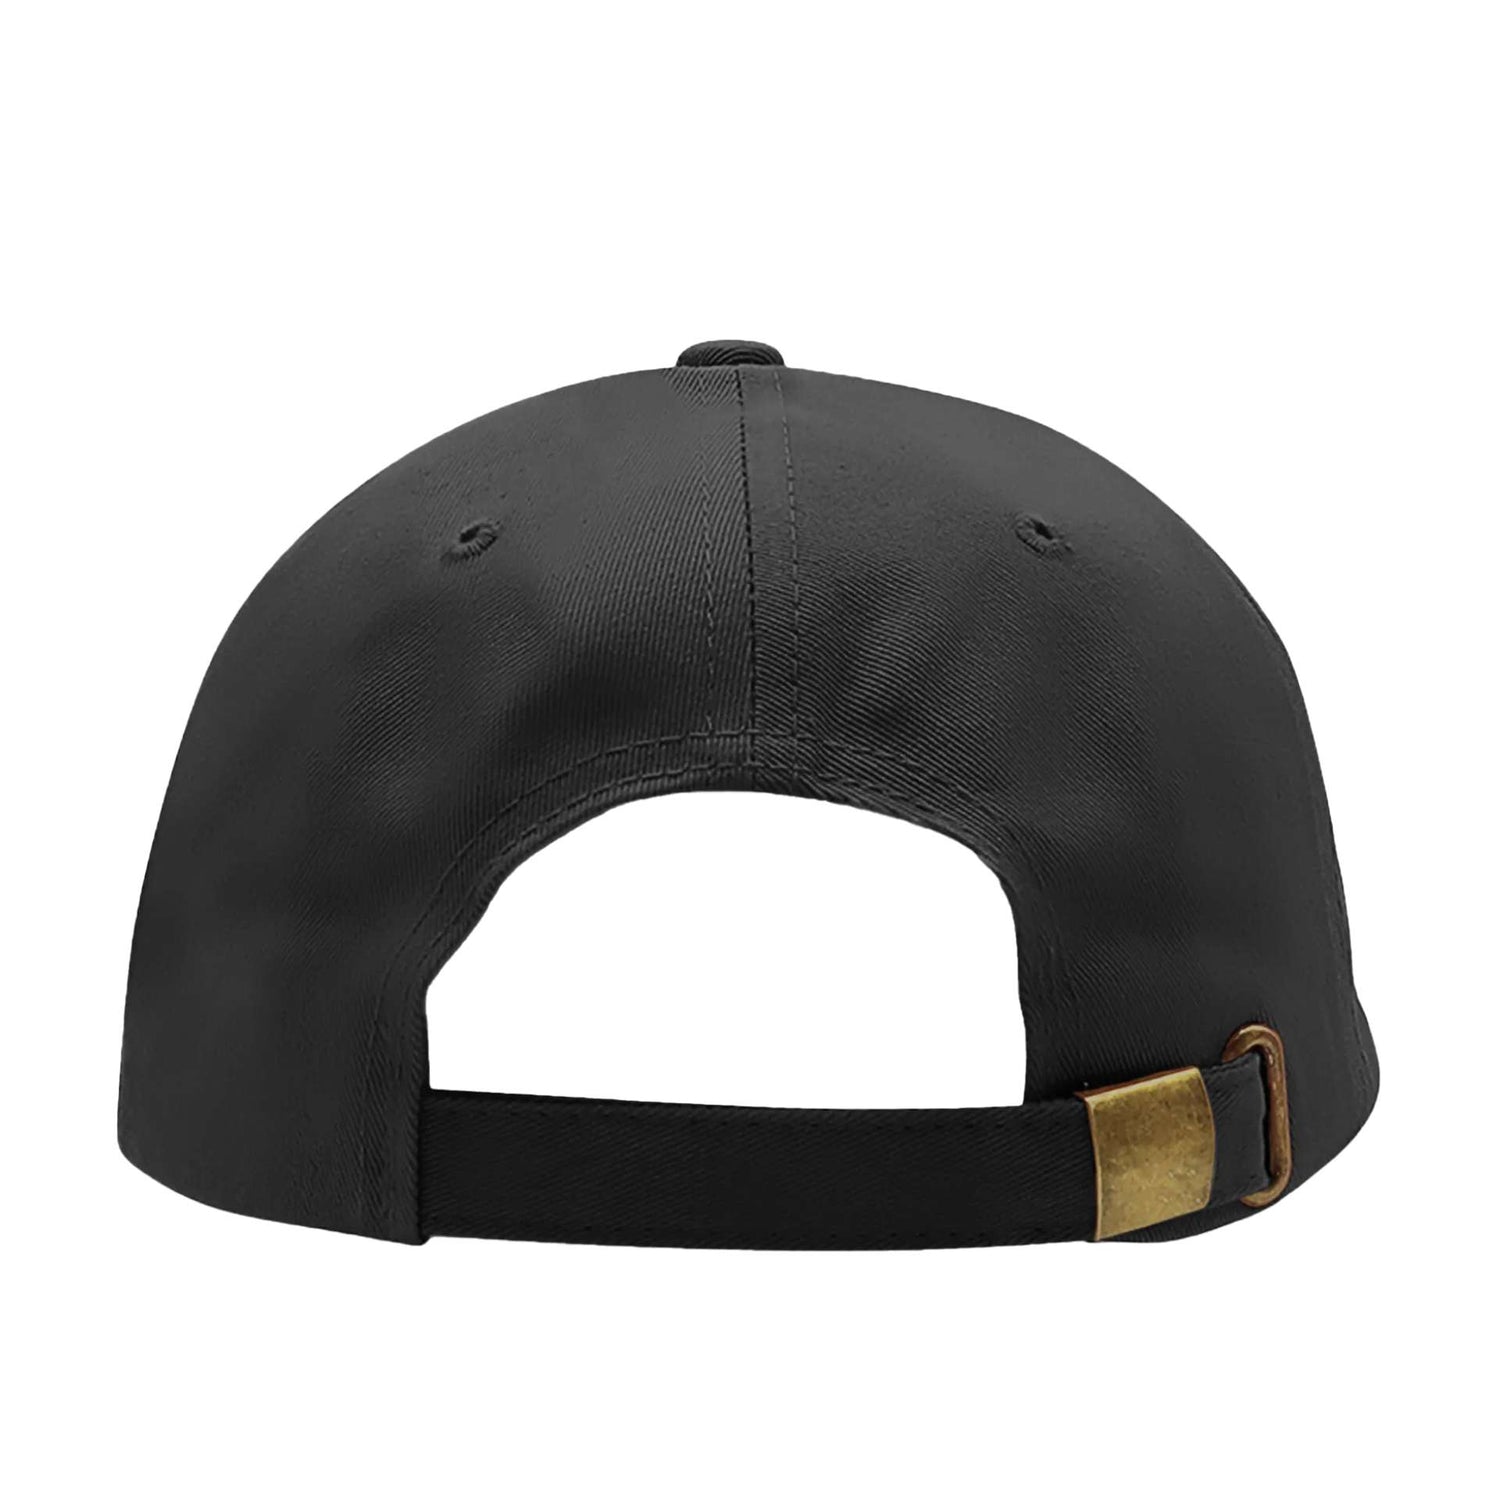 Black of baseball cap showing brass buckle - DSY Lifestyle